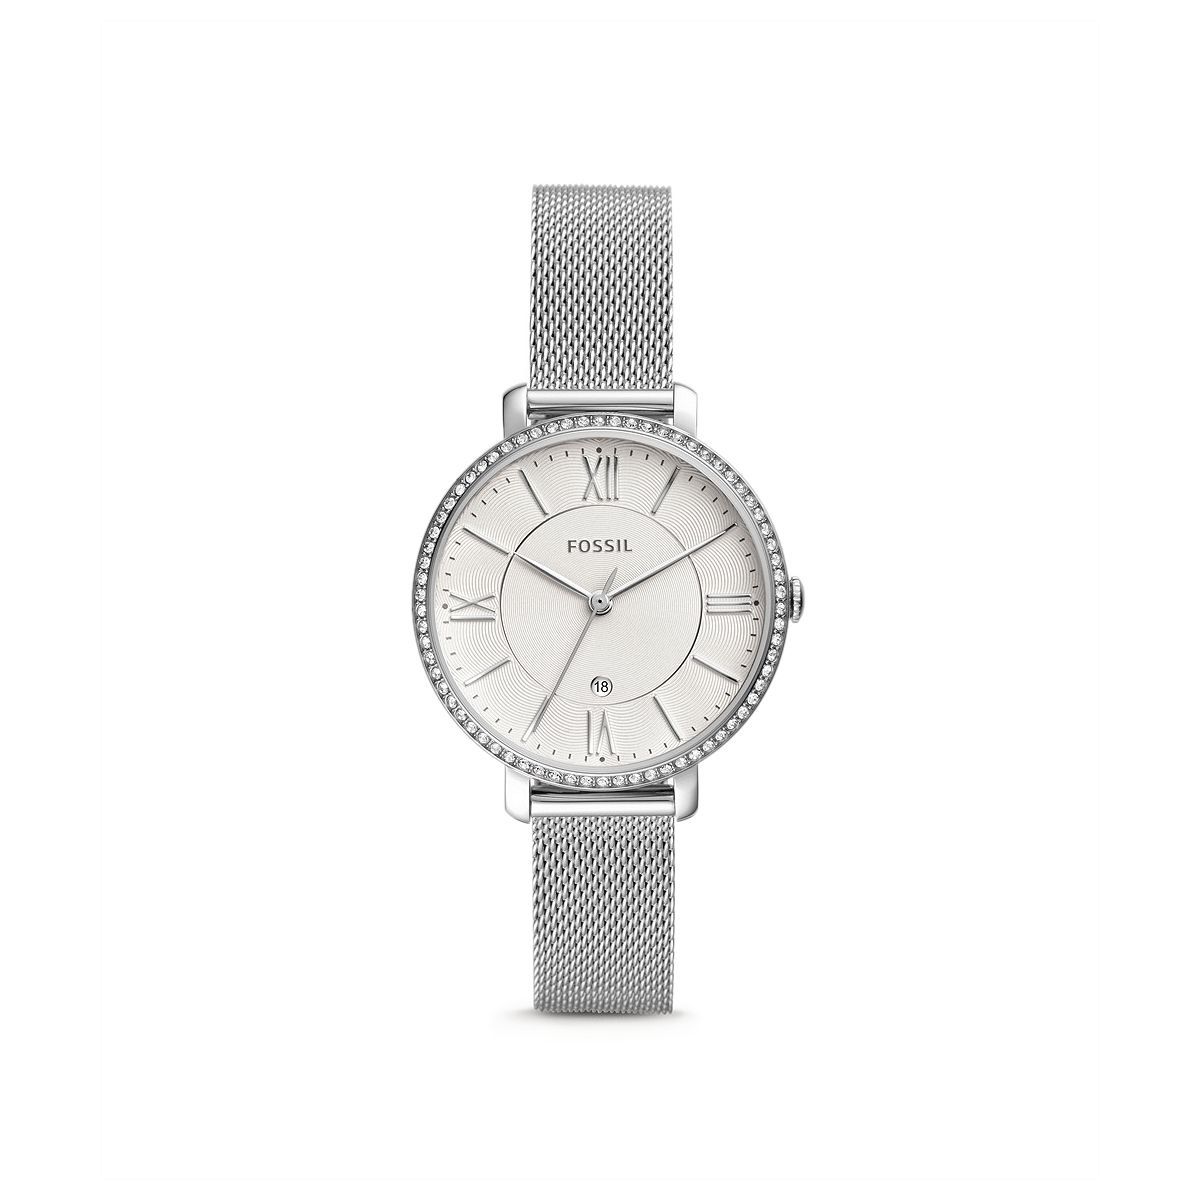 Fossil Jacqueline Stainless Steel Mesh Watch